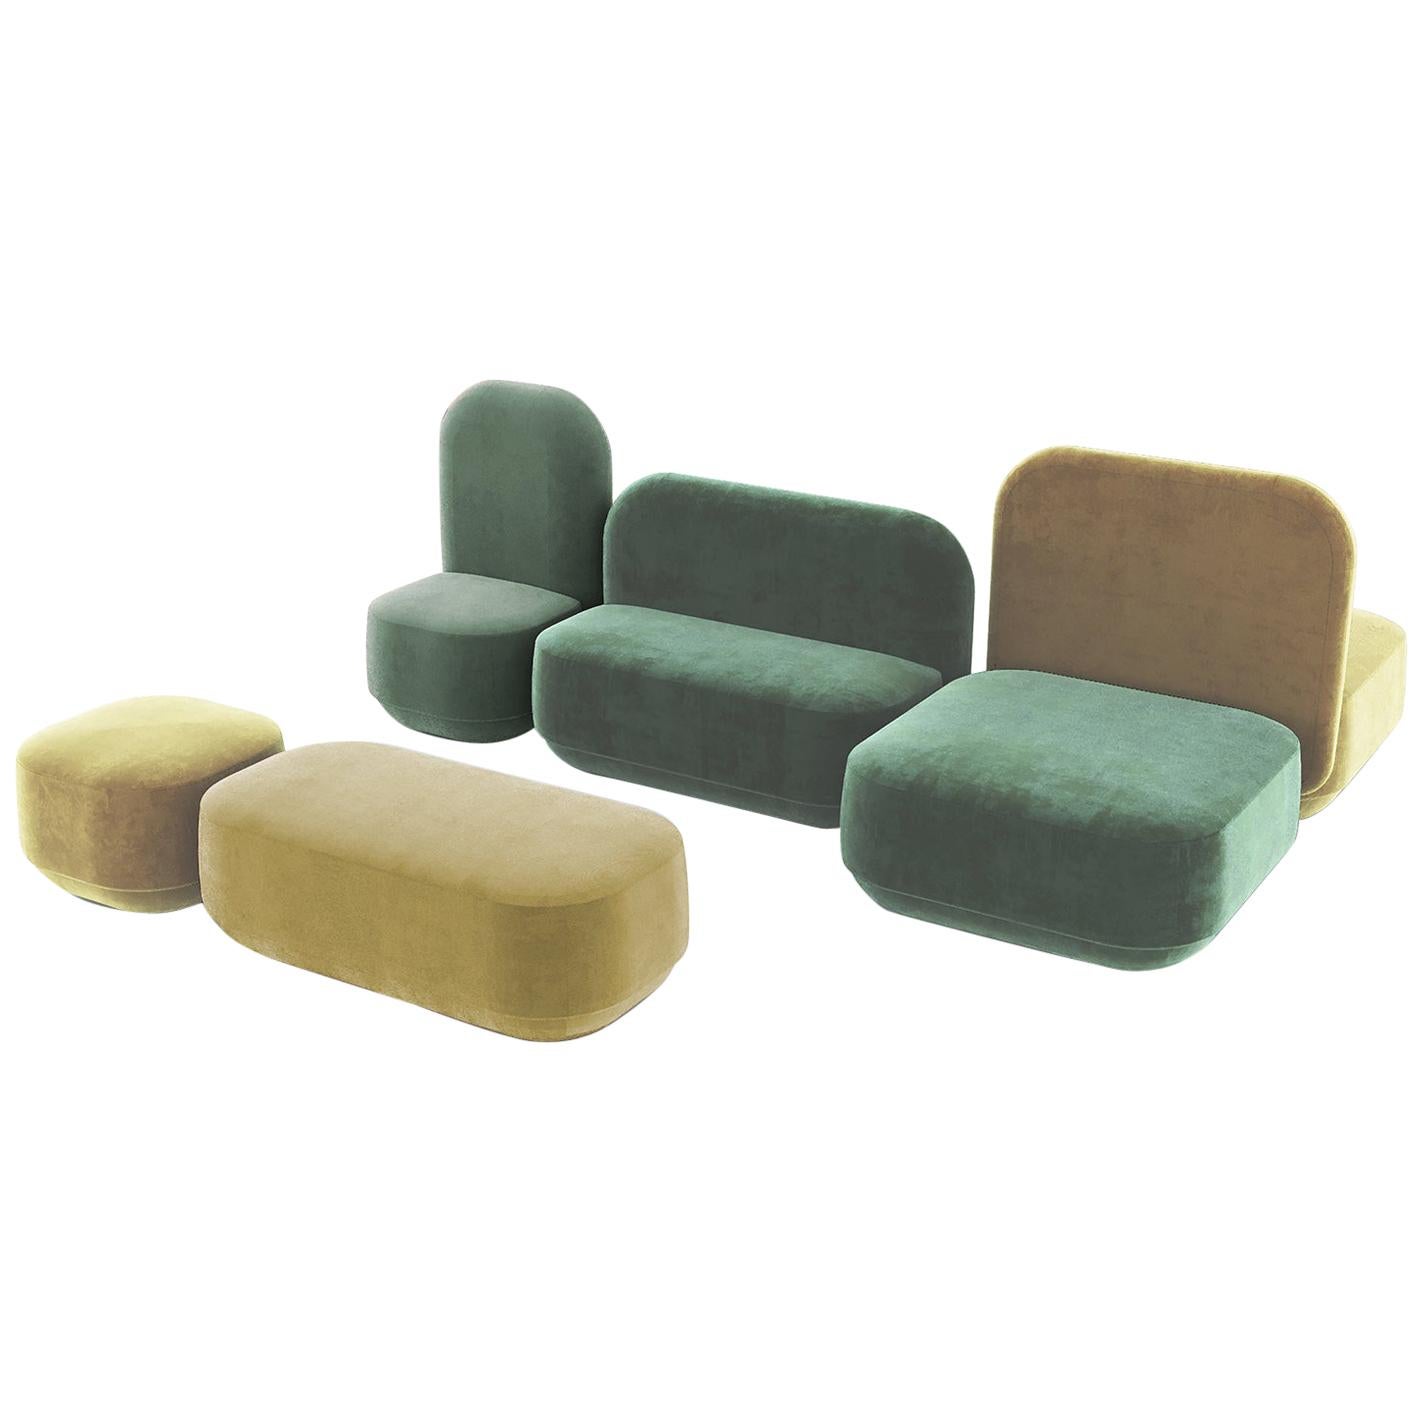 Modular Couch Rubik with Soft Velvet Combo 1 For Sale